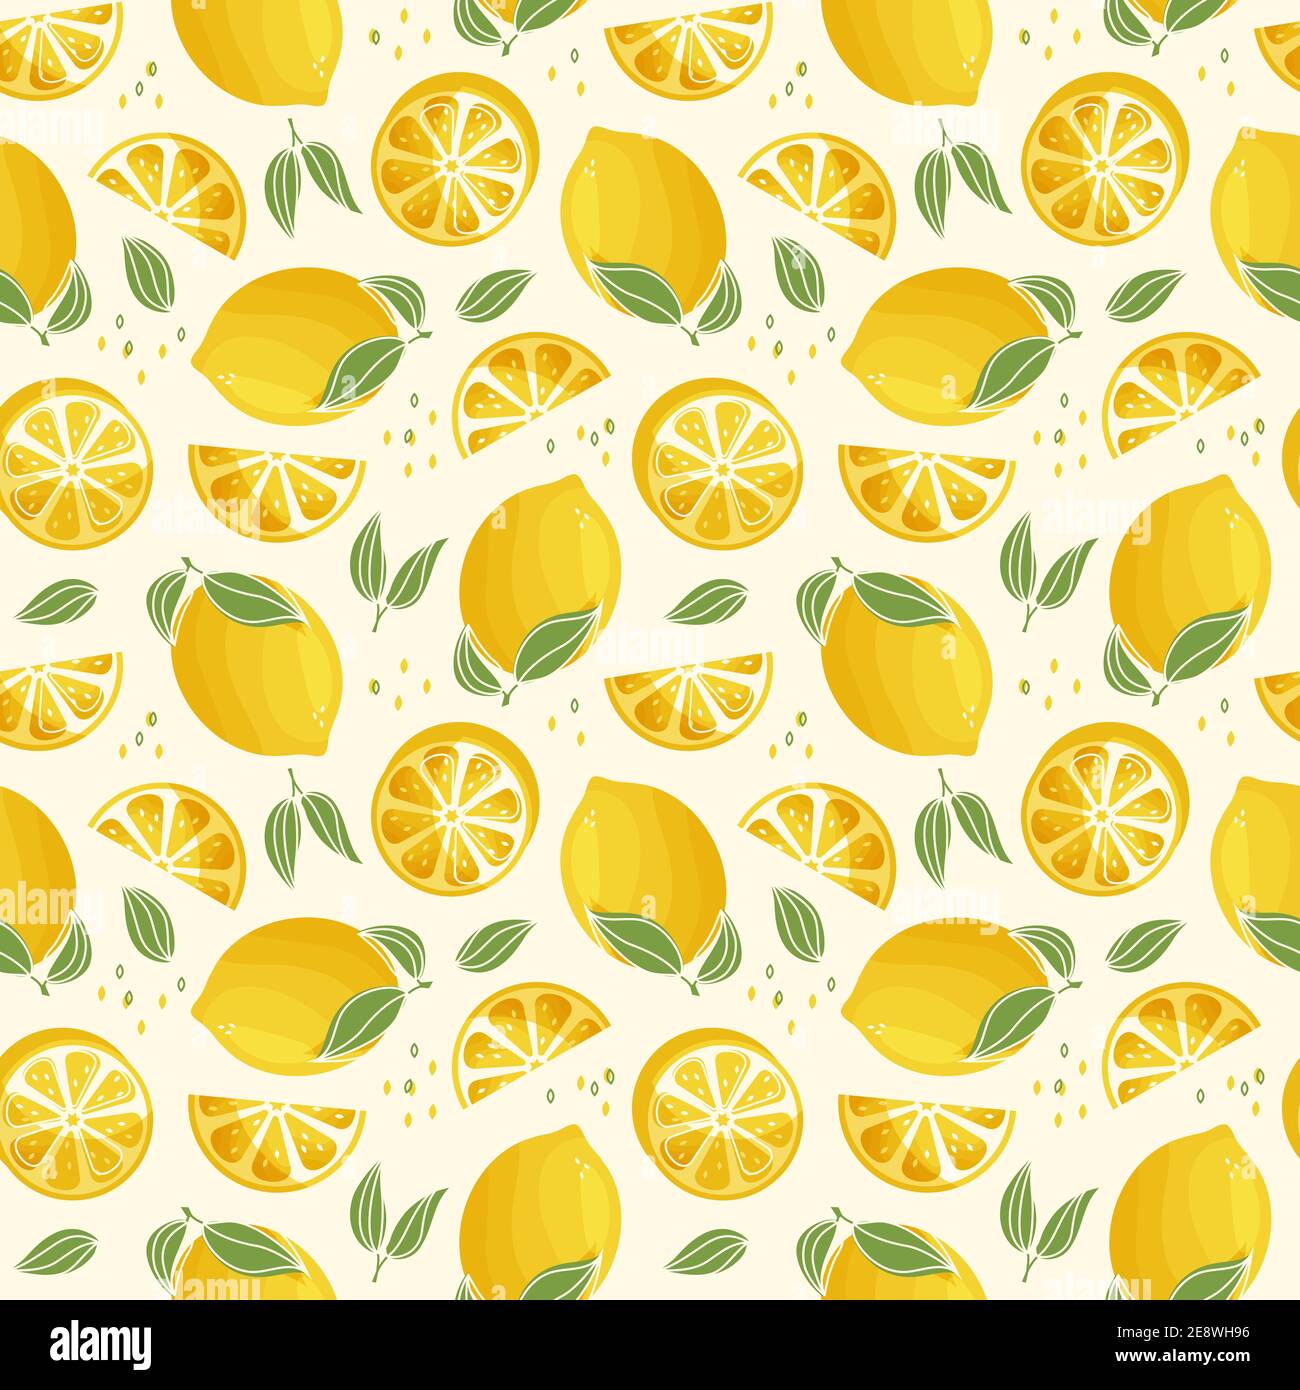 Seamless pattern with lemons. Modern background with juicy citrus fruit and leaves. Vector illustration. Stock Vector